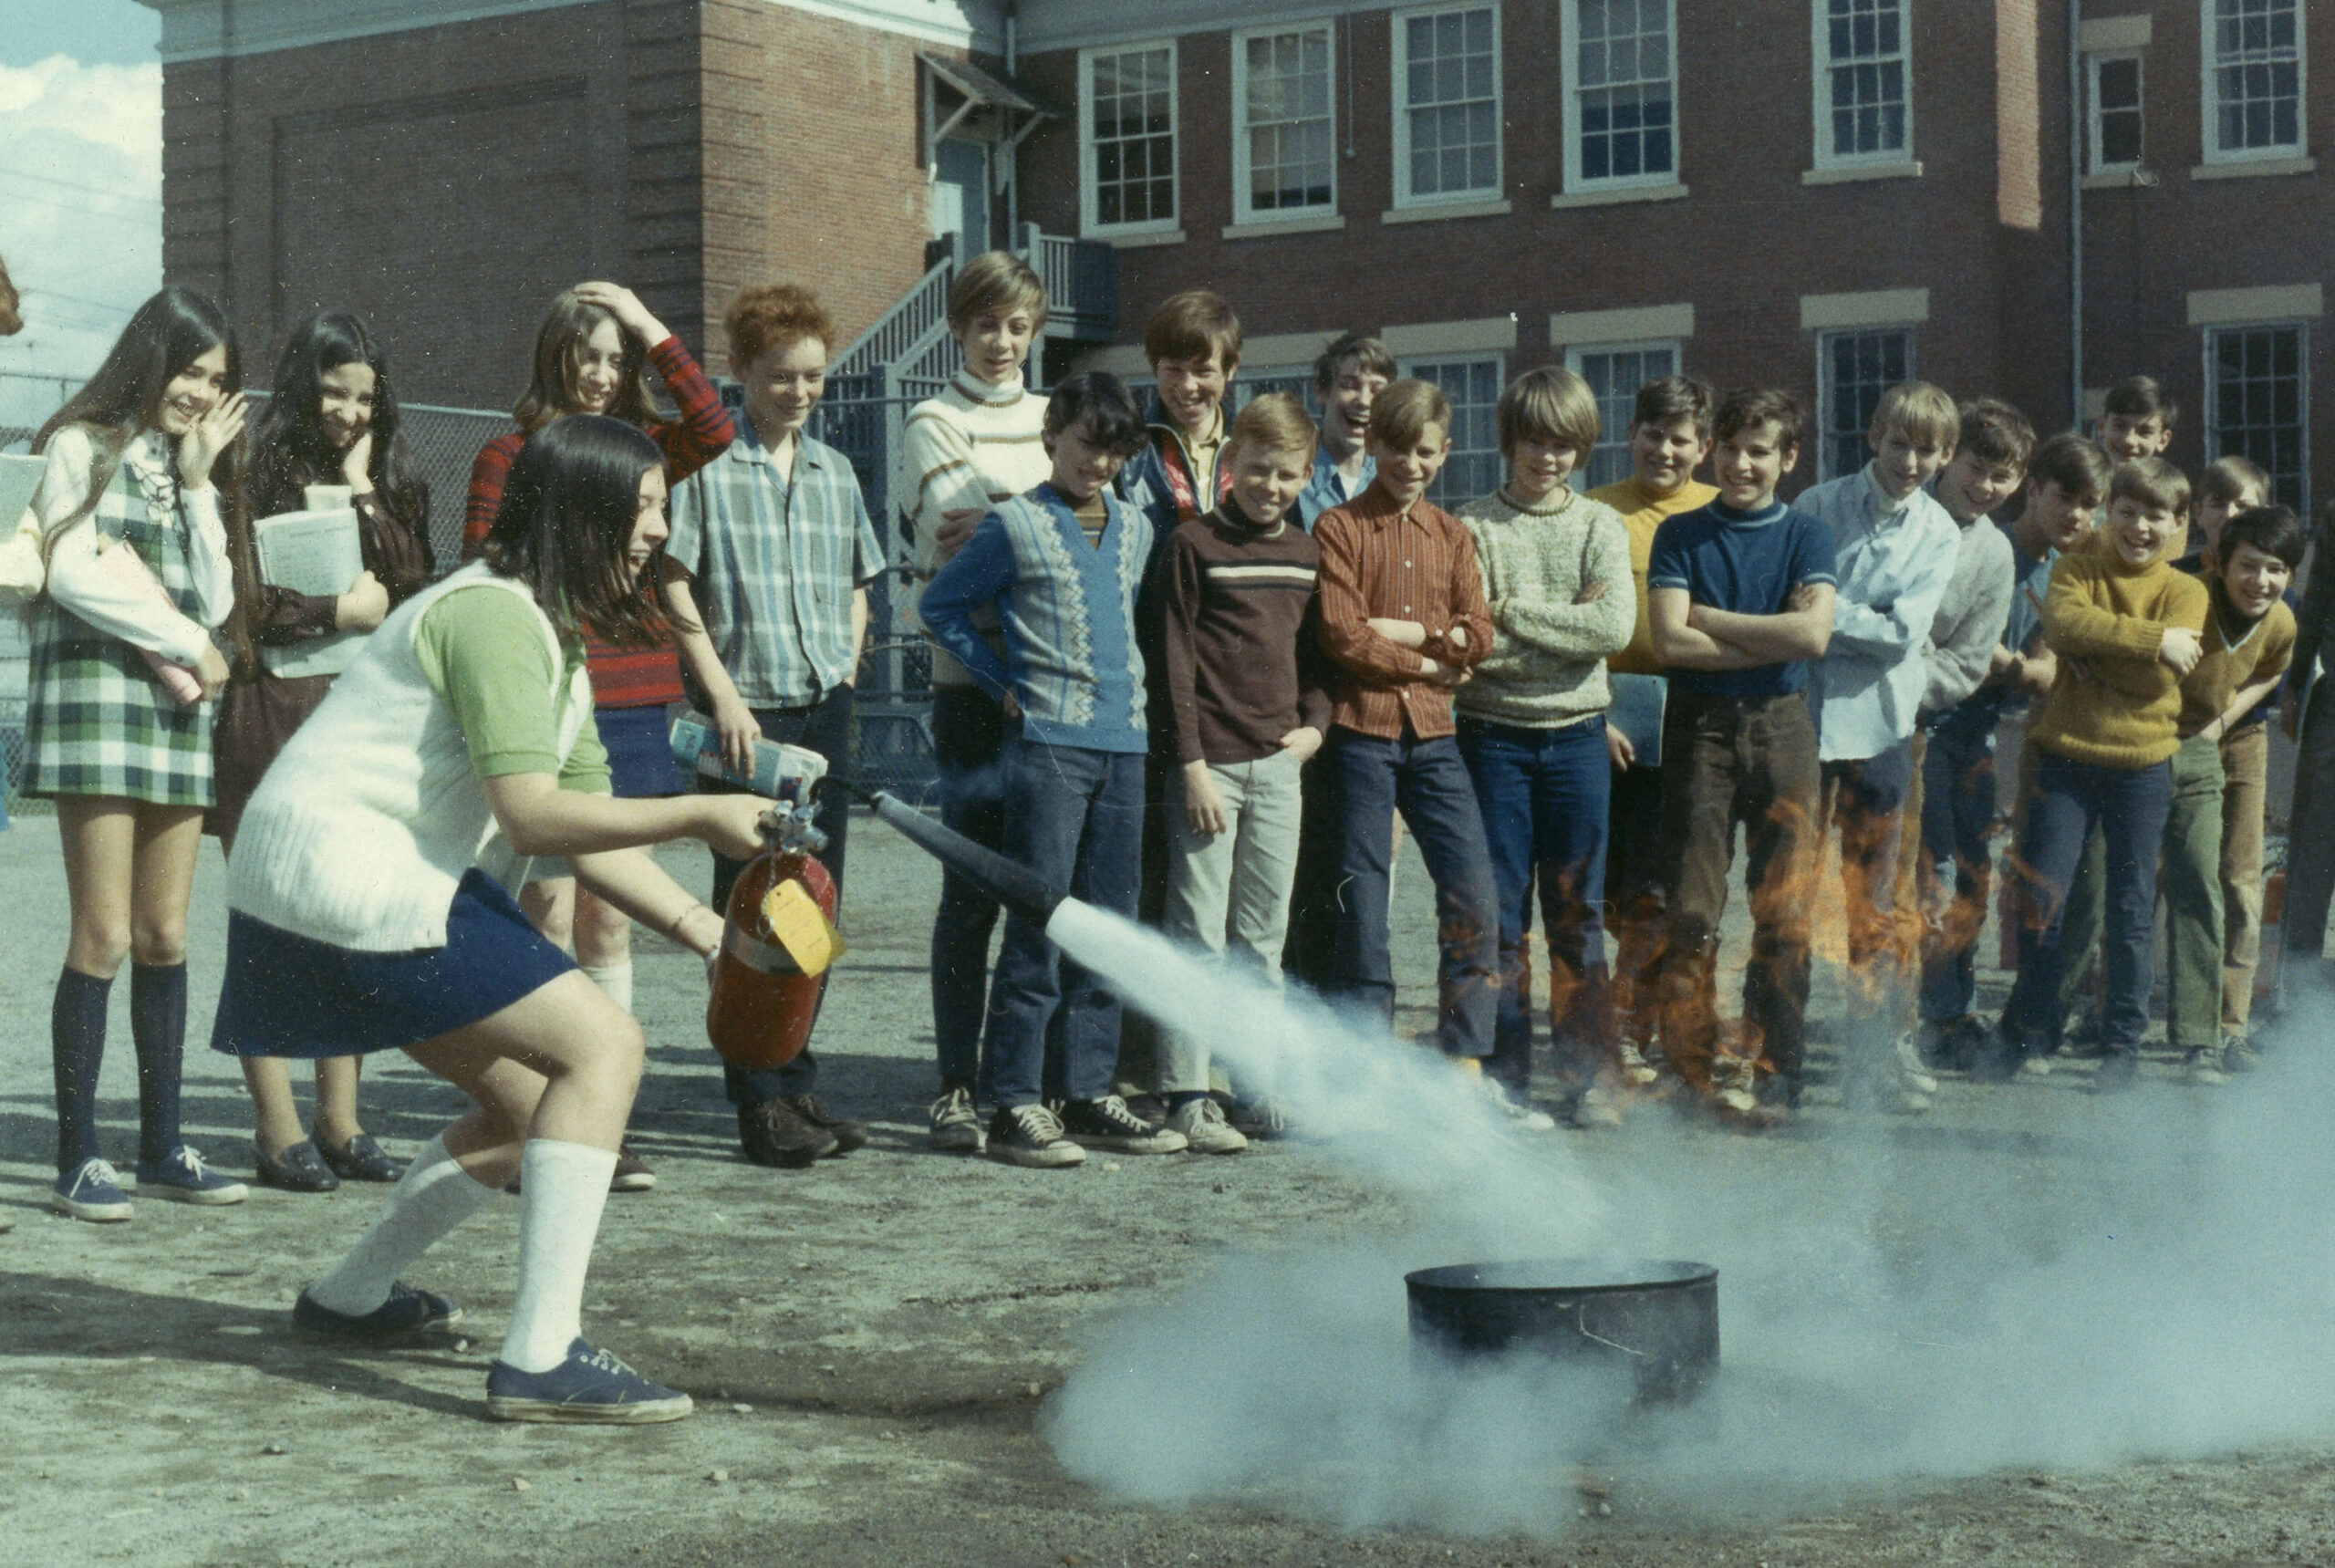 Teaching fire safety at an elementary school, ca. 1970. Reference code: COV-S280-: CVA 354-328